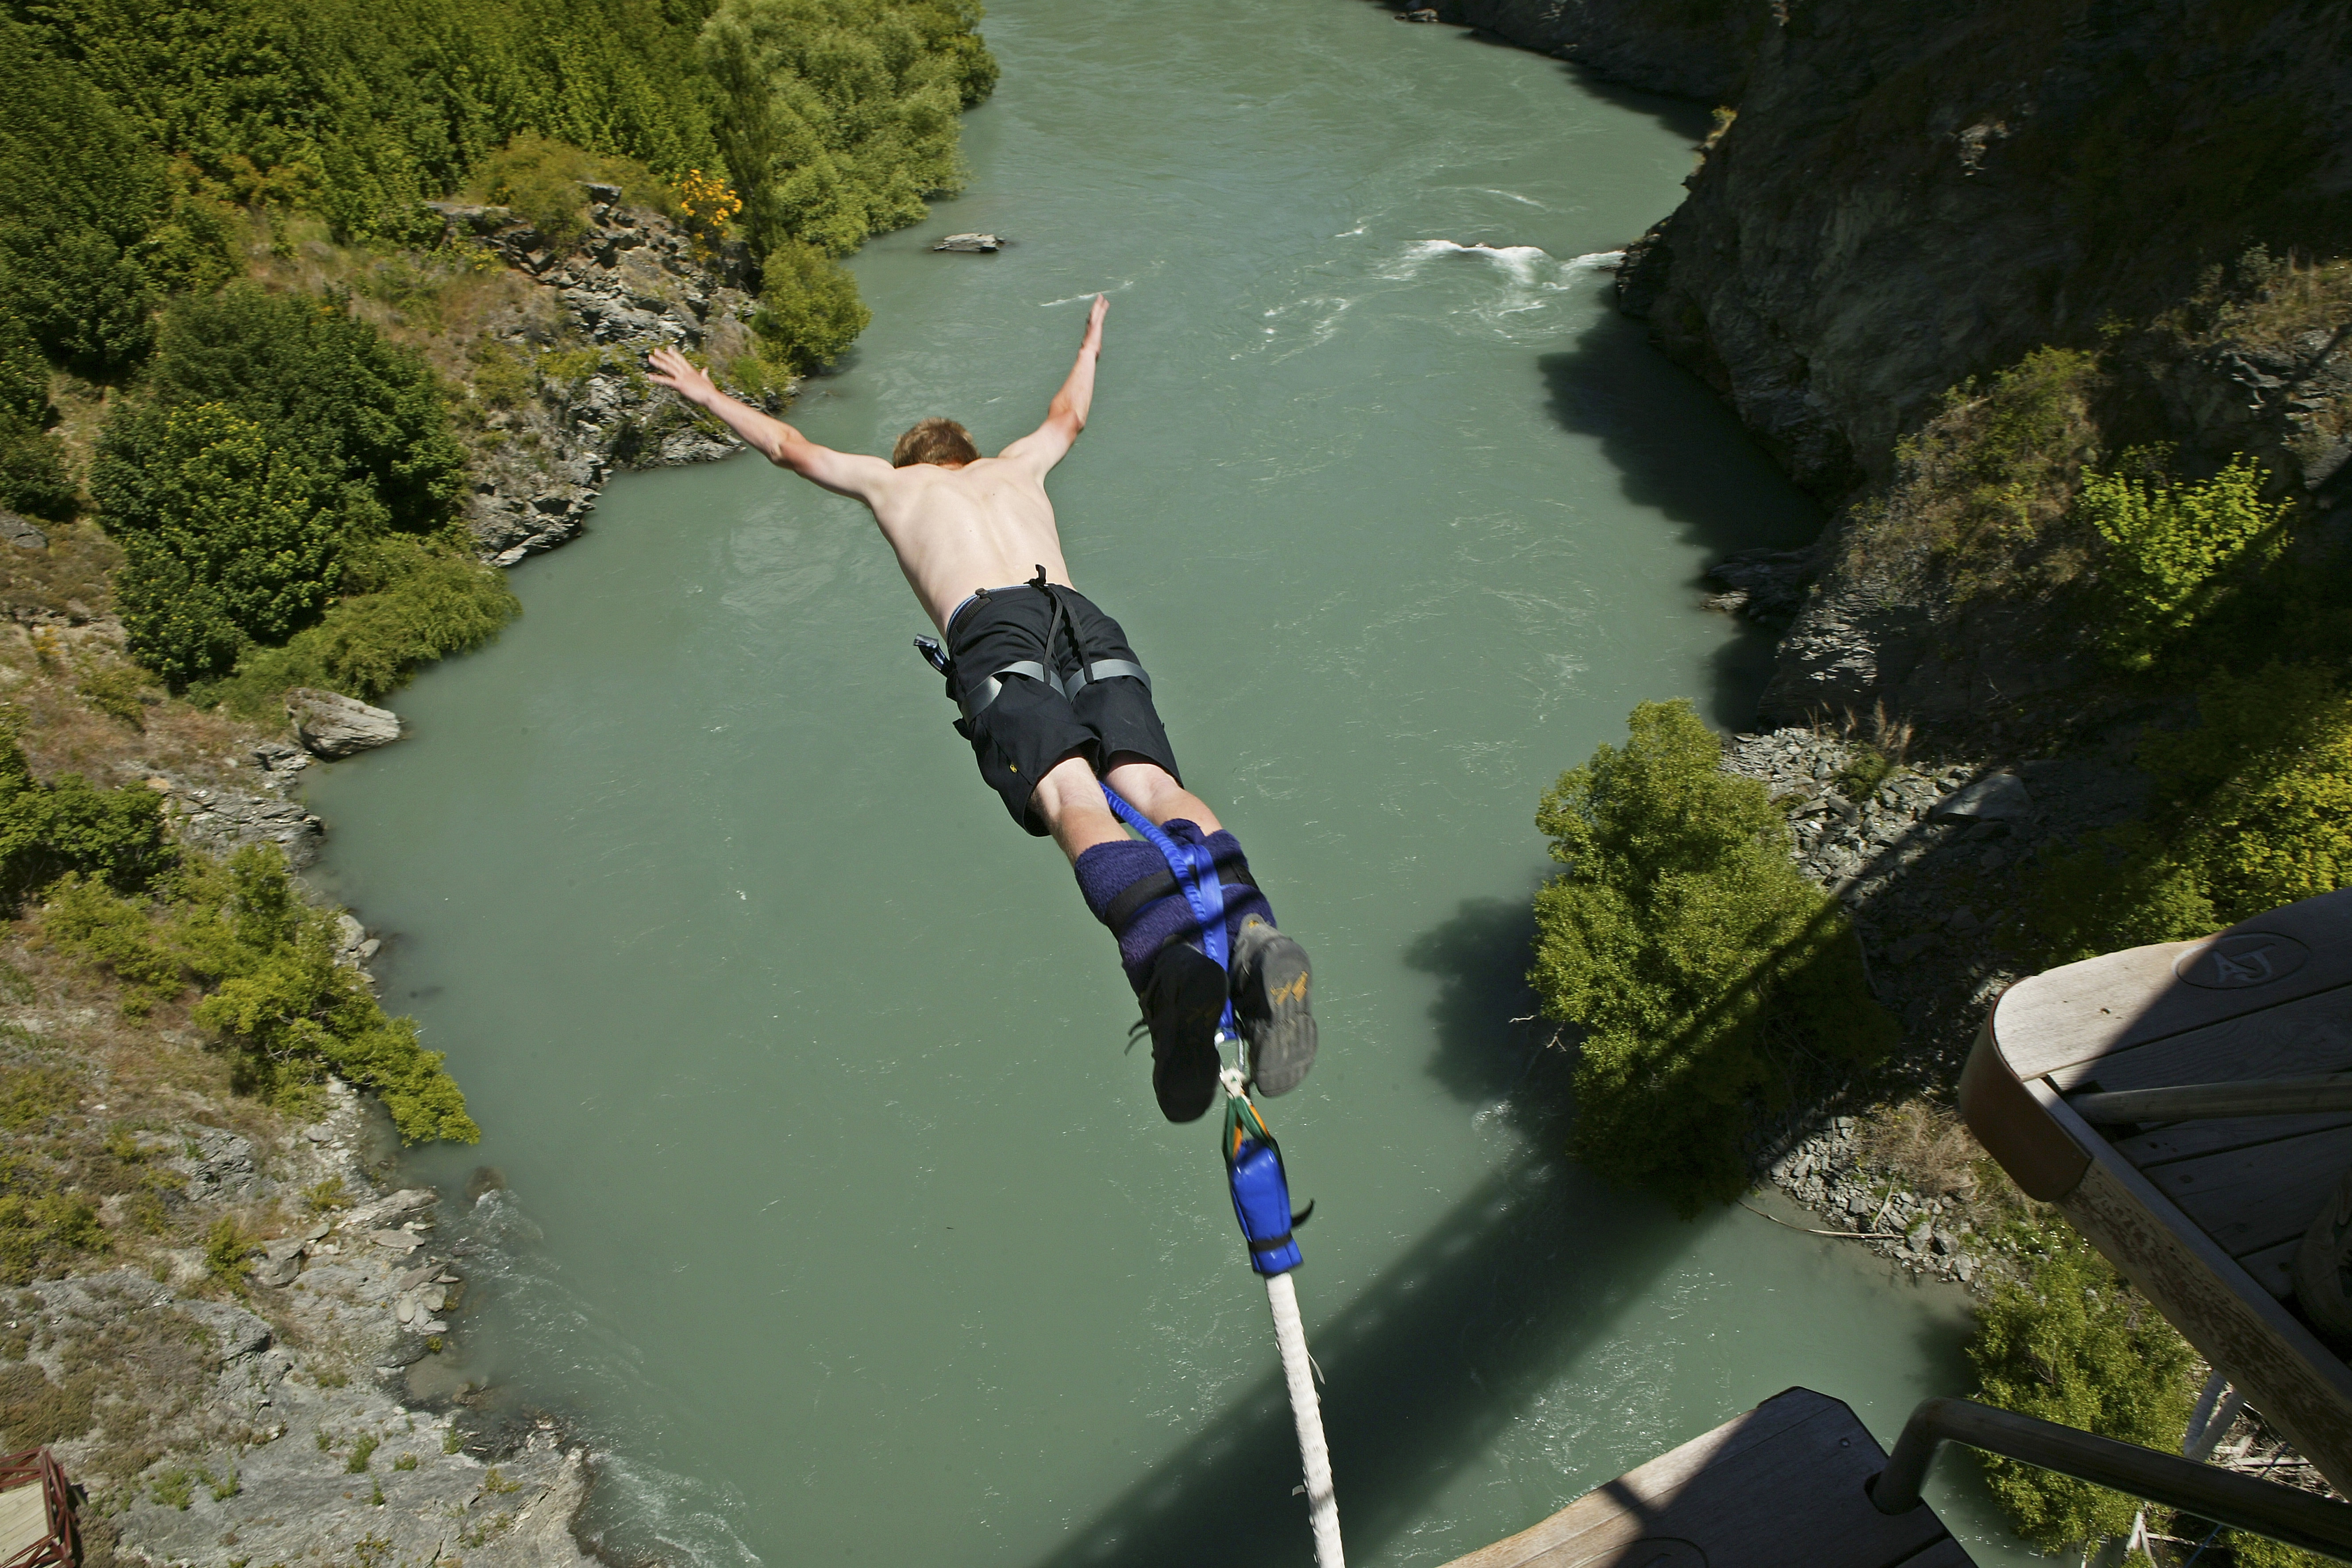 Bungy jumping new zealand adventure travel safety first